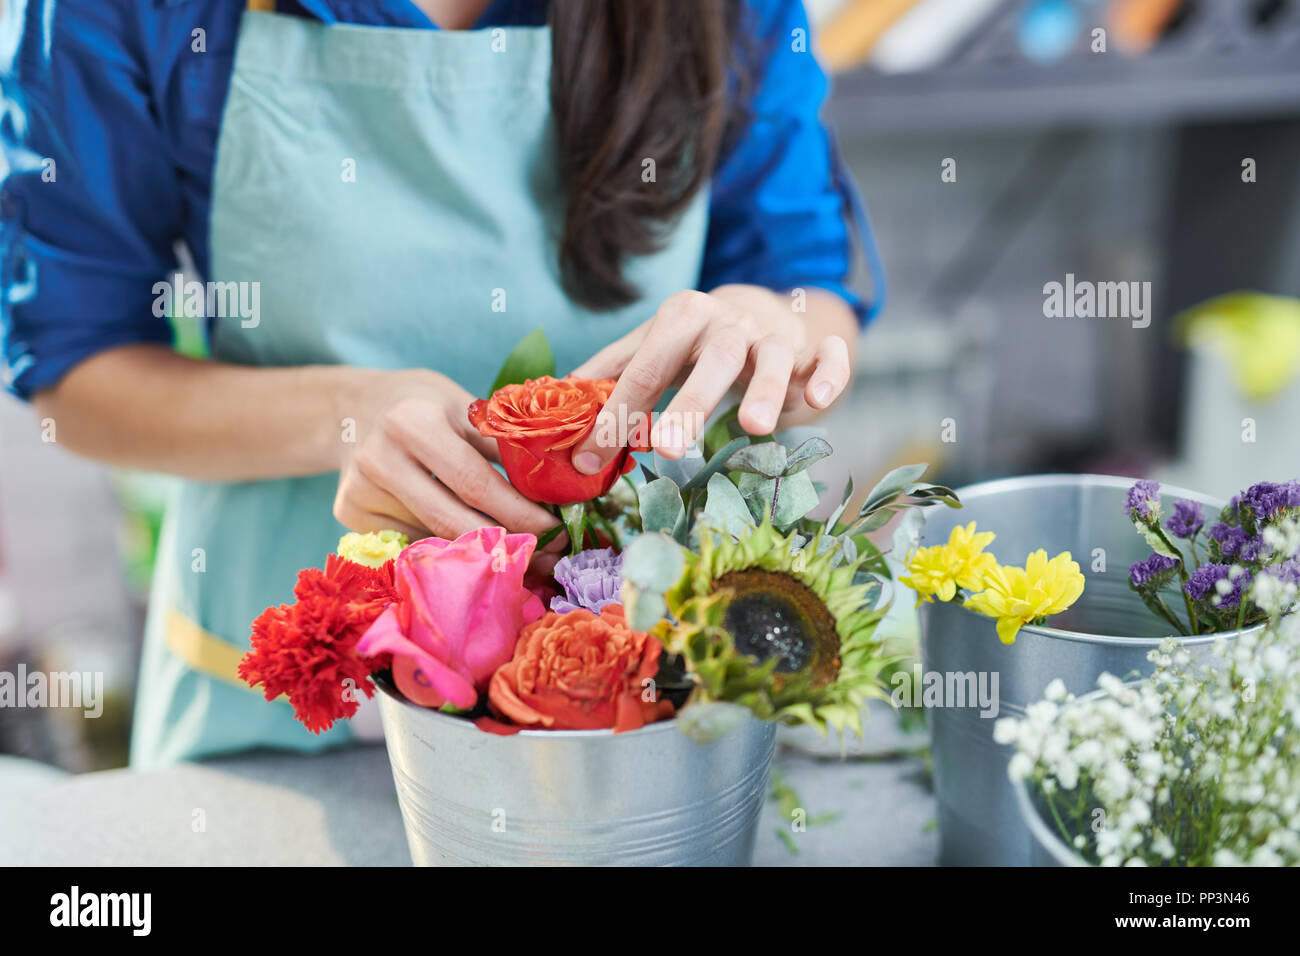 Young Woman Arranging Rose Composition Stock Photo